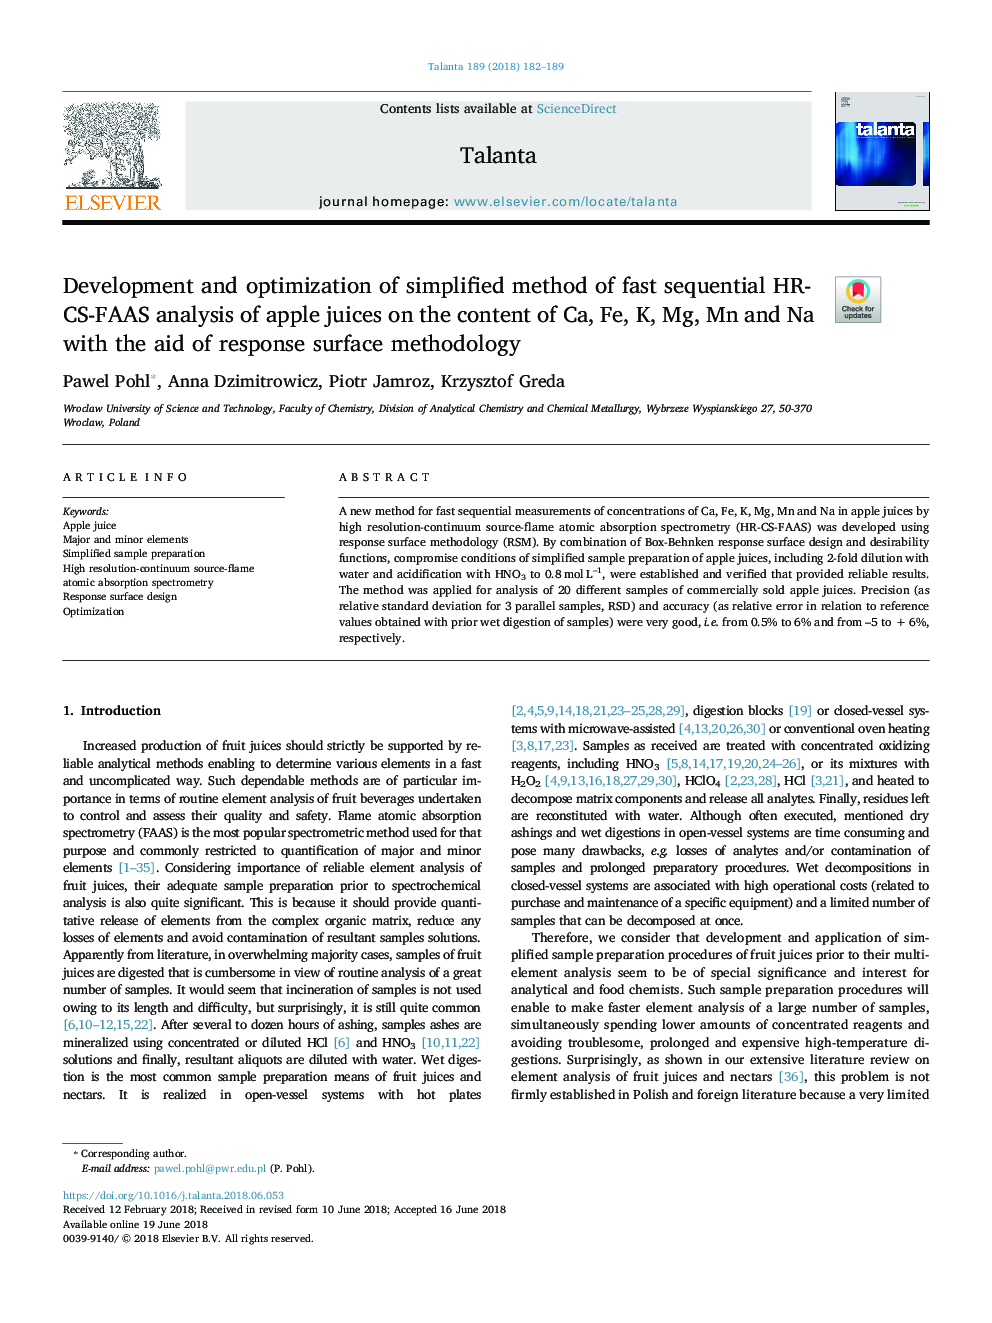 Development and optimization of simplified method of fast sequential HR-CS-FAAS analysis of apple juices on the content of Ca, Fe, K, Mg, Mn and Na with the aid of response surface methodology